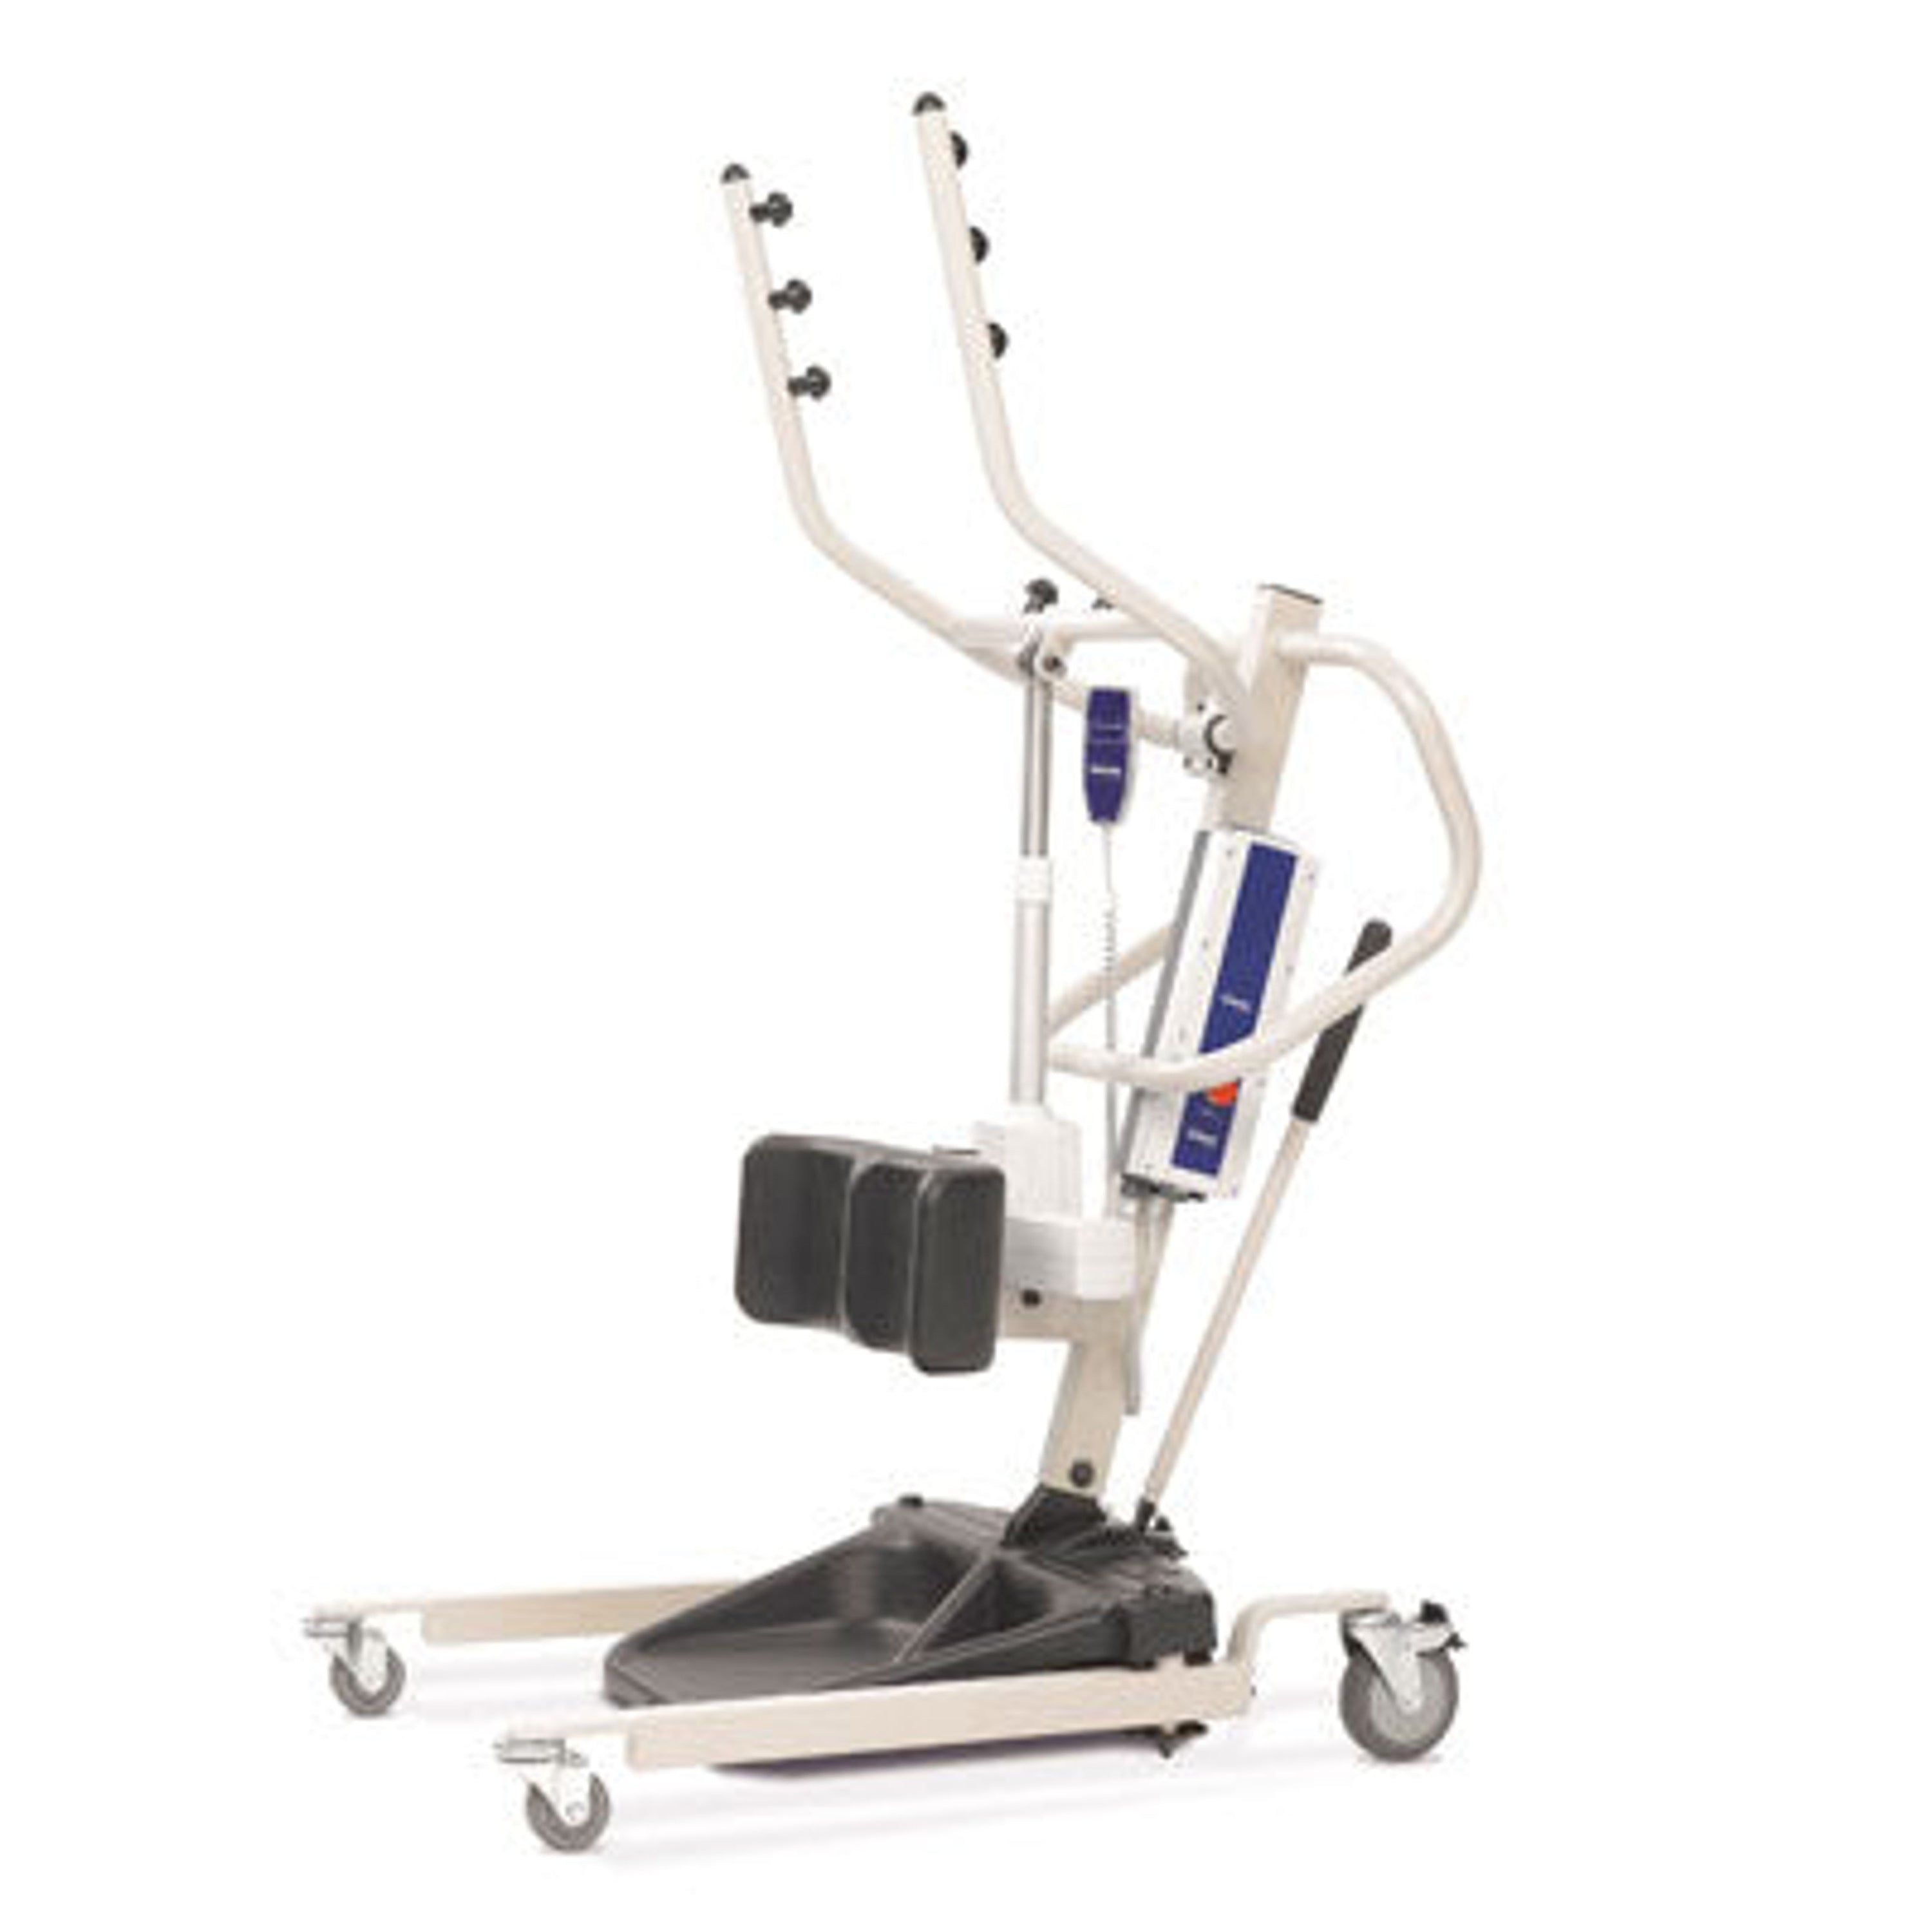 Invacare Reliant 350 Stand-Up Lift with Manual Low Base